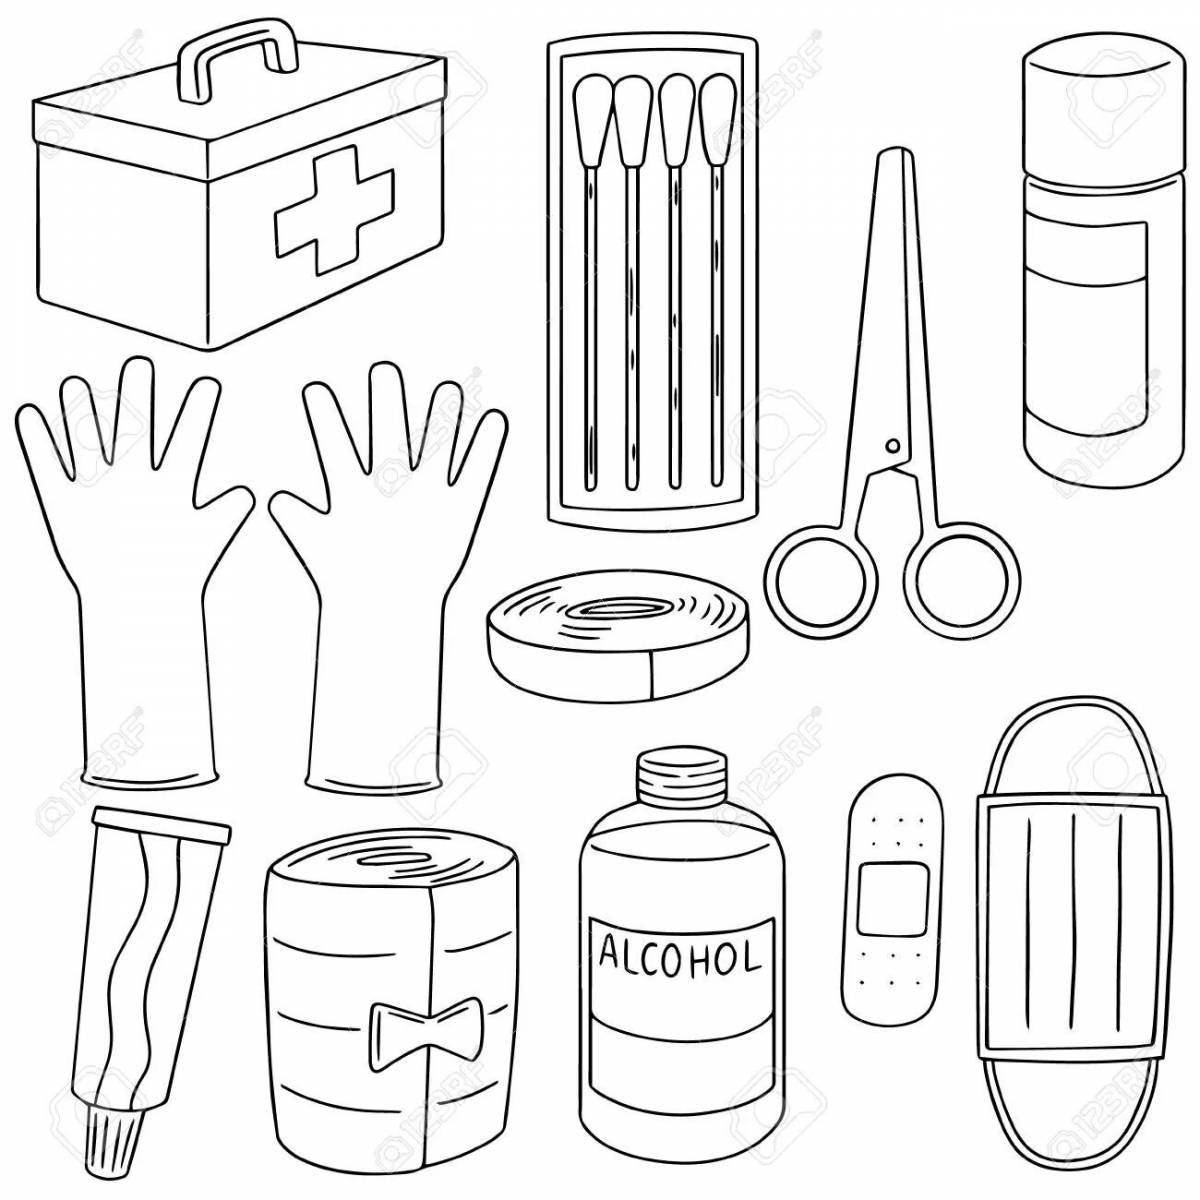 Exciting coloring pages for medical instruments